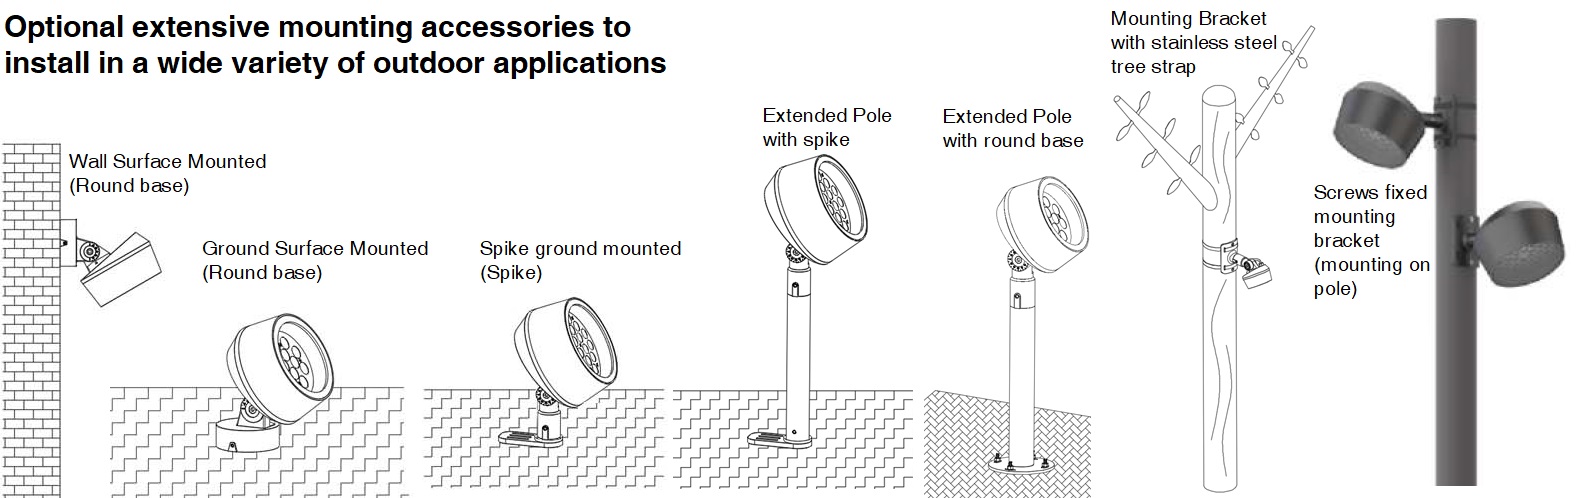 optional extensive mounting accessories enables the luminaire to install in a wide variety of outdoor applications, such as round base, ground spike, tree strap, curved base for pole or extended Pole.